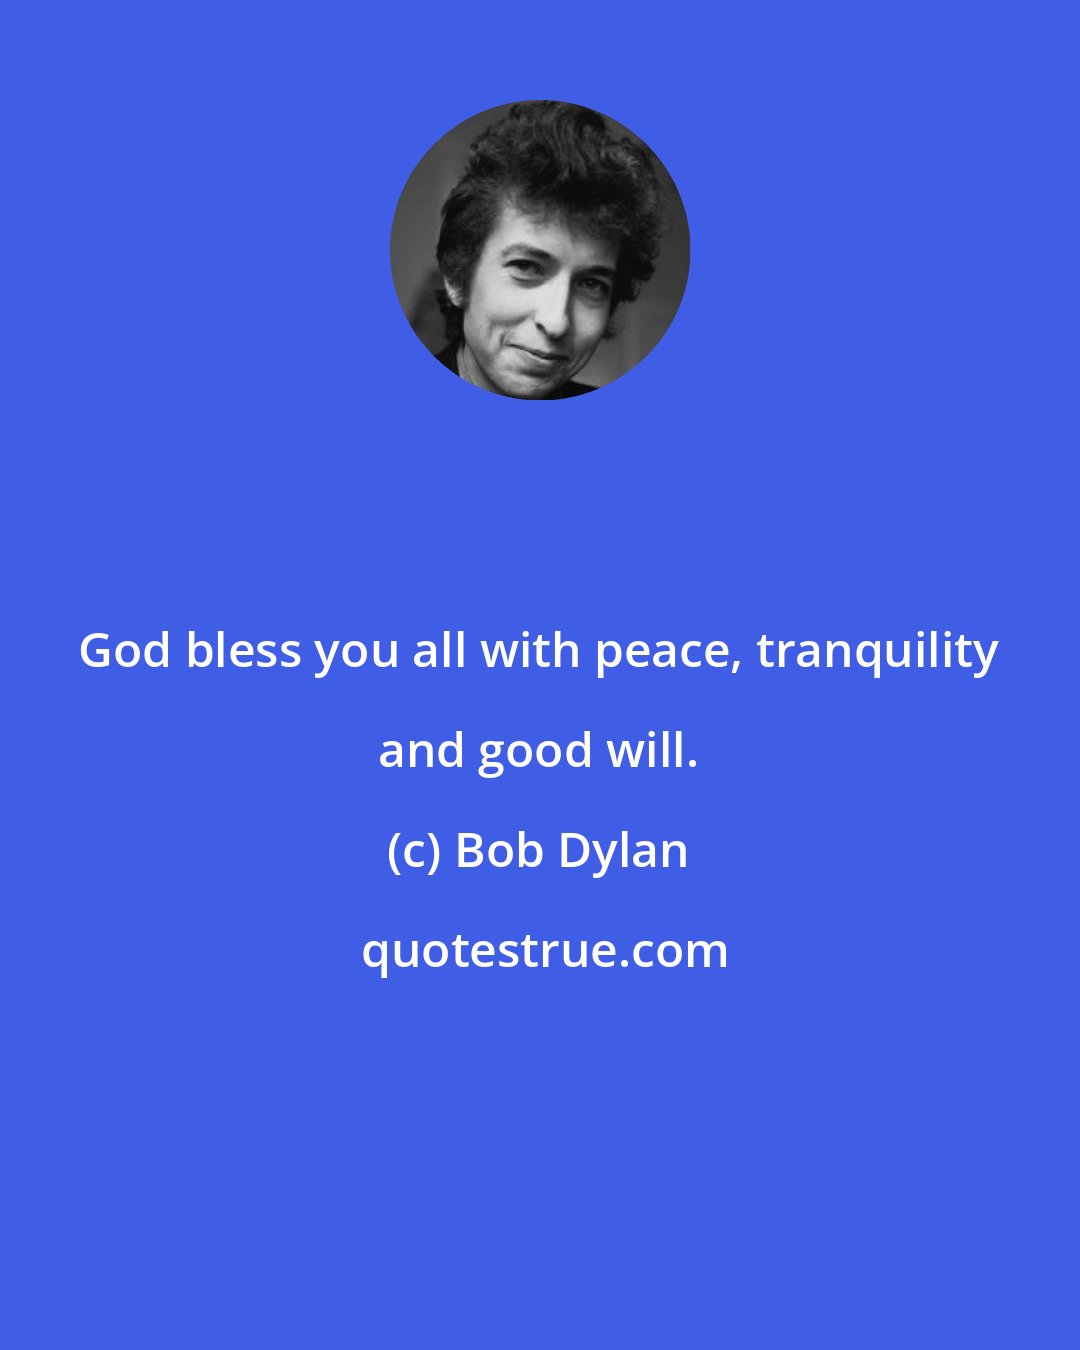 Bob Dylan: God bless you all with peace, tranquility and good will.